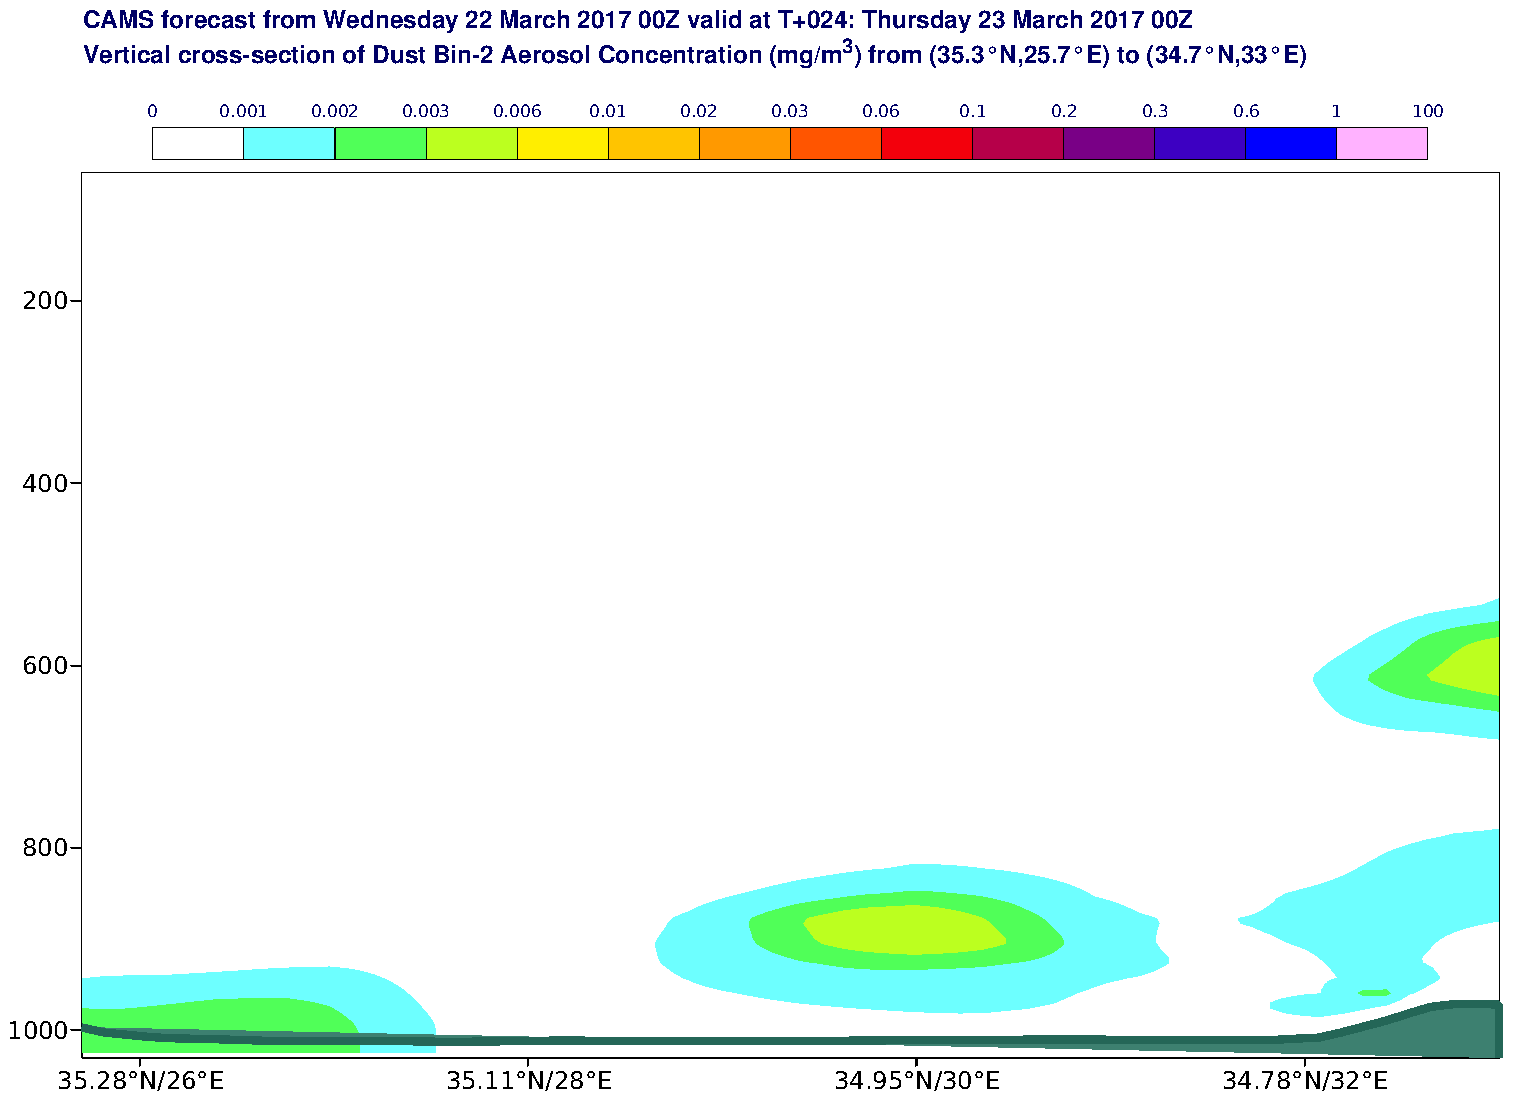 Vertical cross-section of Dust Bin-2 Aerosol Concentration (mg/m3) valid at T24 - 2017-03-23 00:00